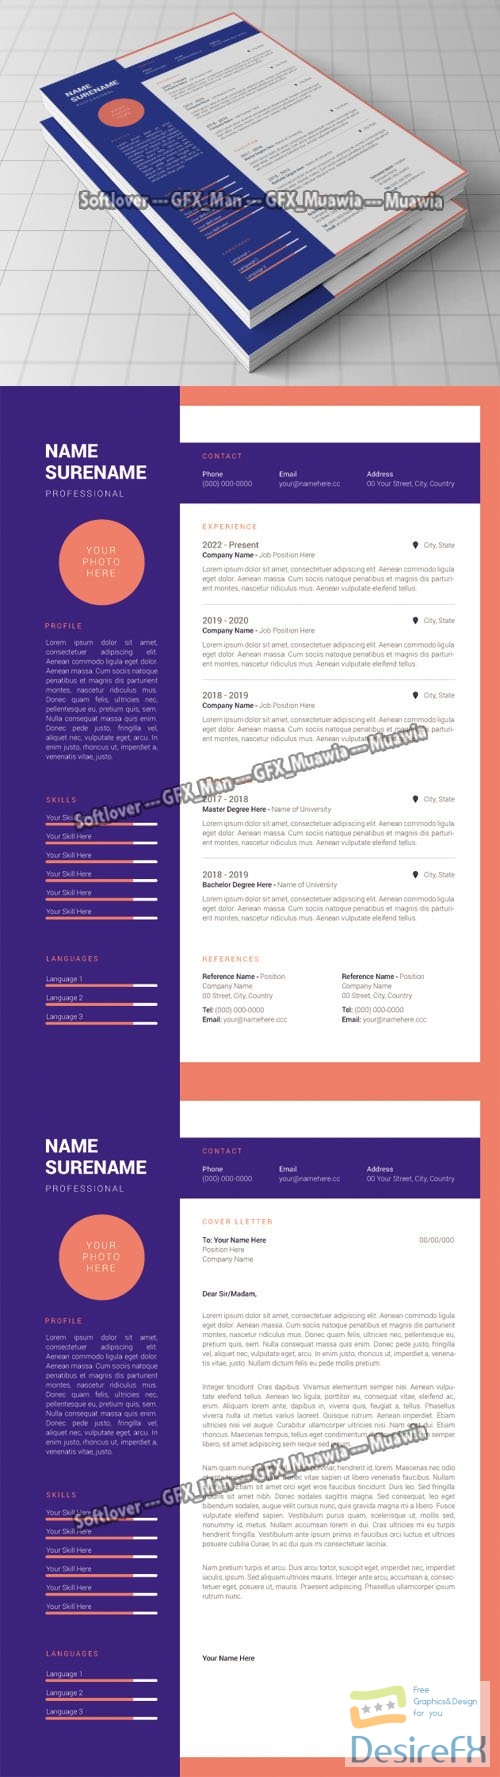 Clean Resume CV &amp; Cover Letter Vector Templates